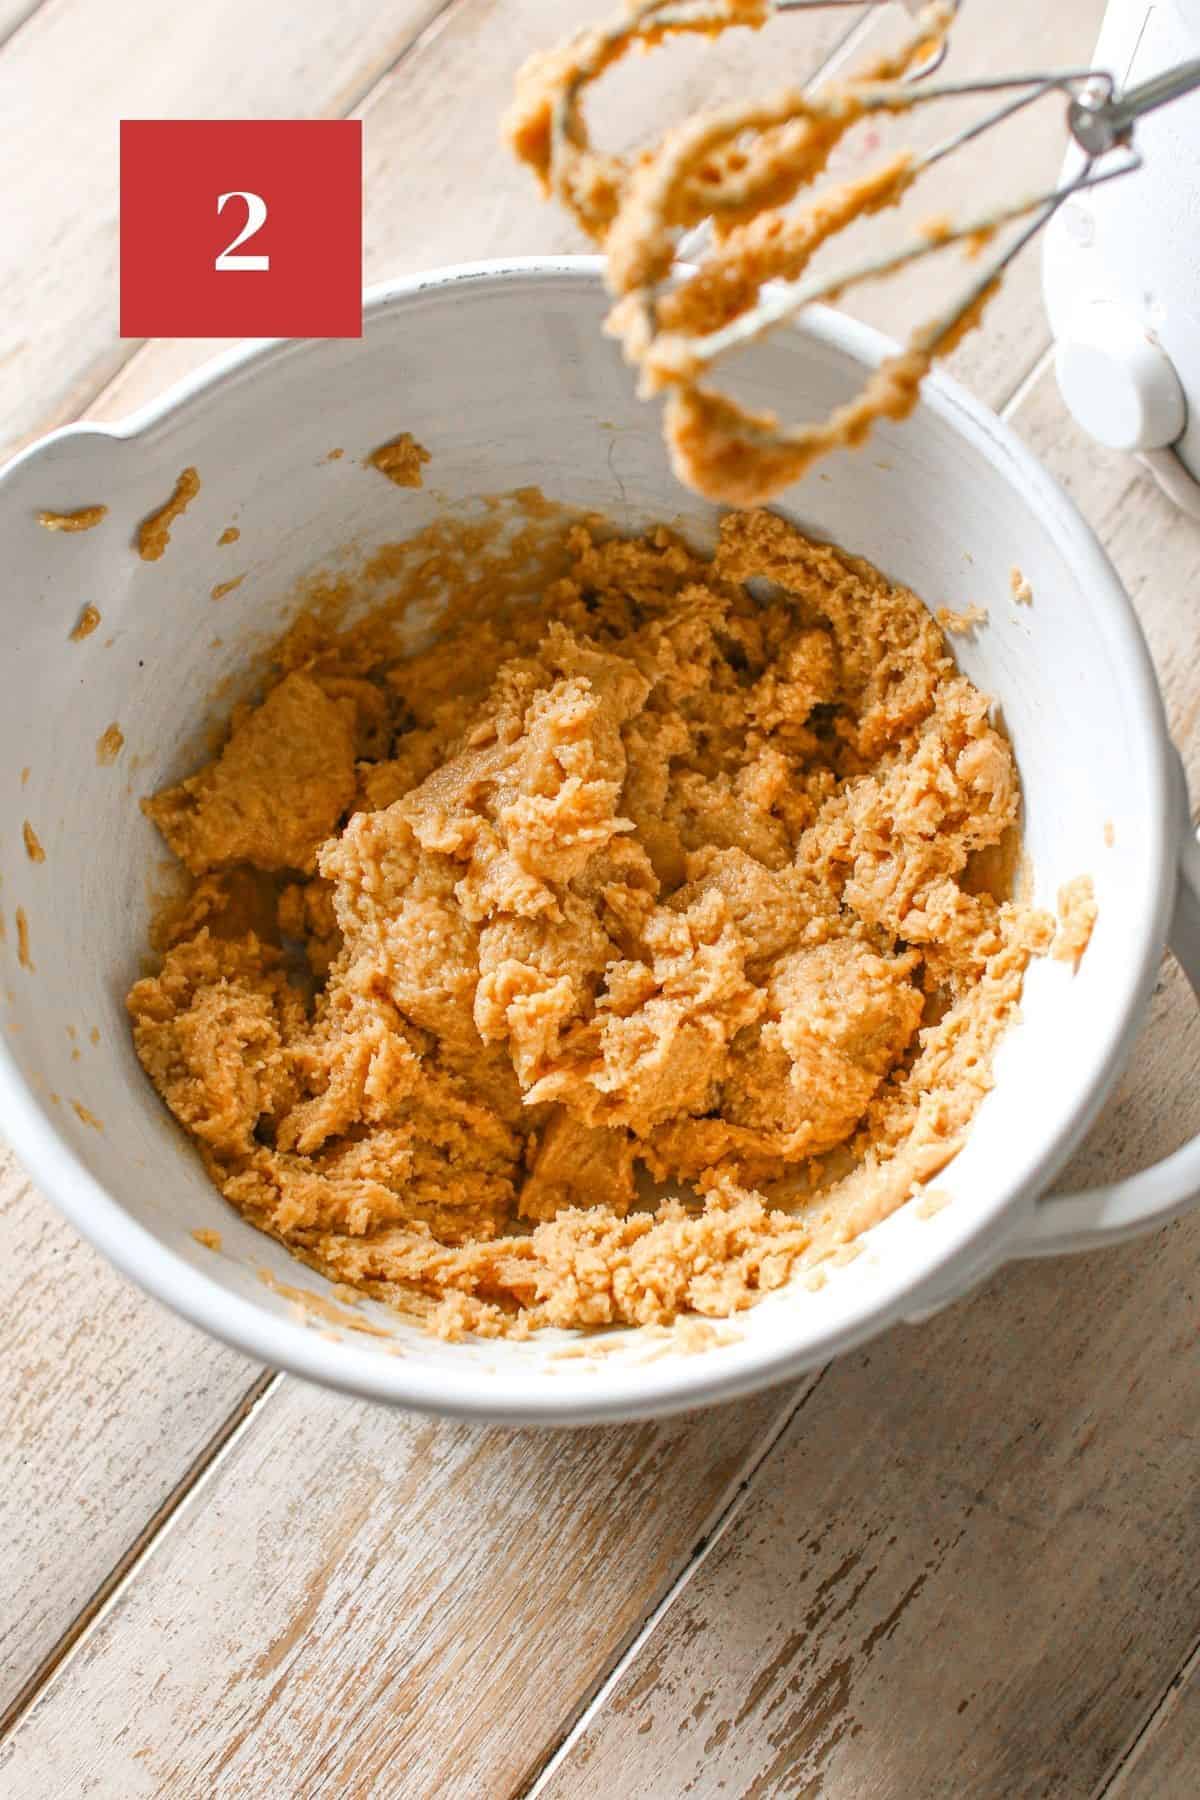 A mixing bowl with peanut butter mix with a hand mixer off to the side on a wood plank background. In the upper left corner is a dark red square with a white '2' in the center.